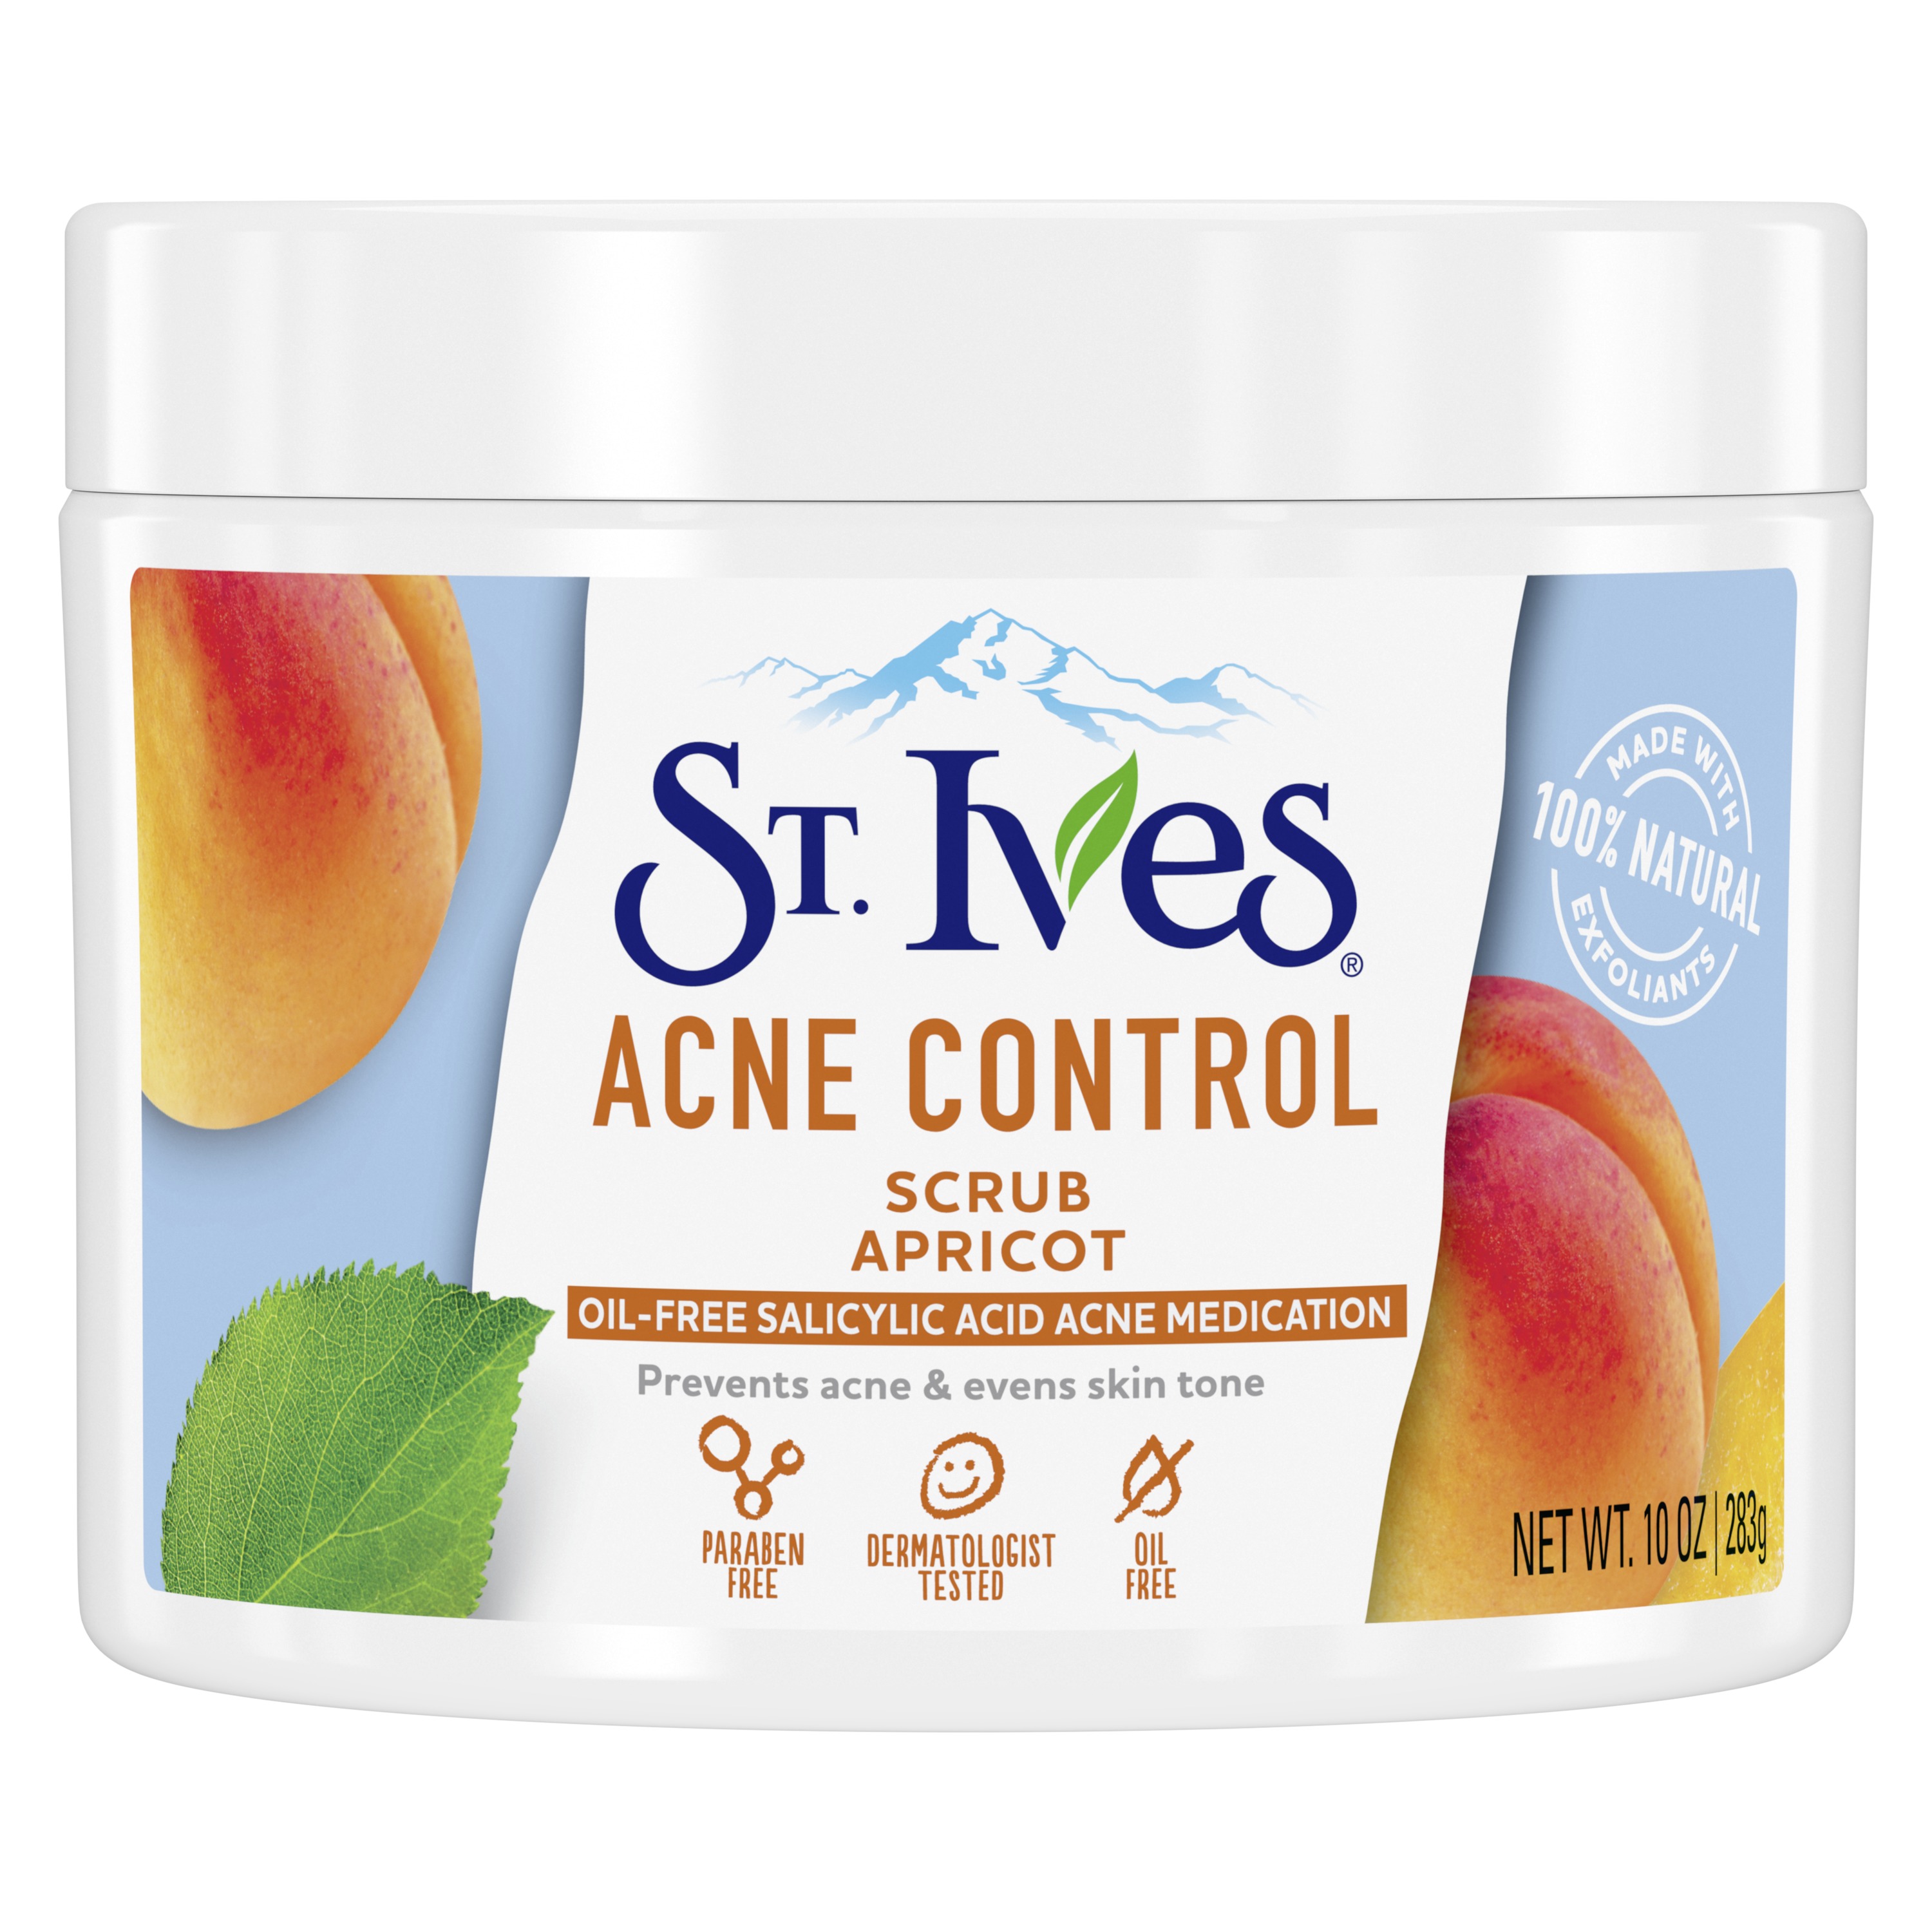 St. Ives Acne Control Apricot Face Scrub, 10 oz - image 1 of 11